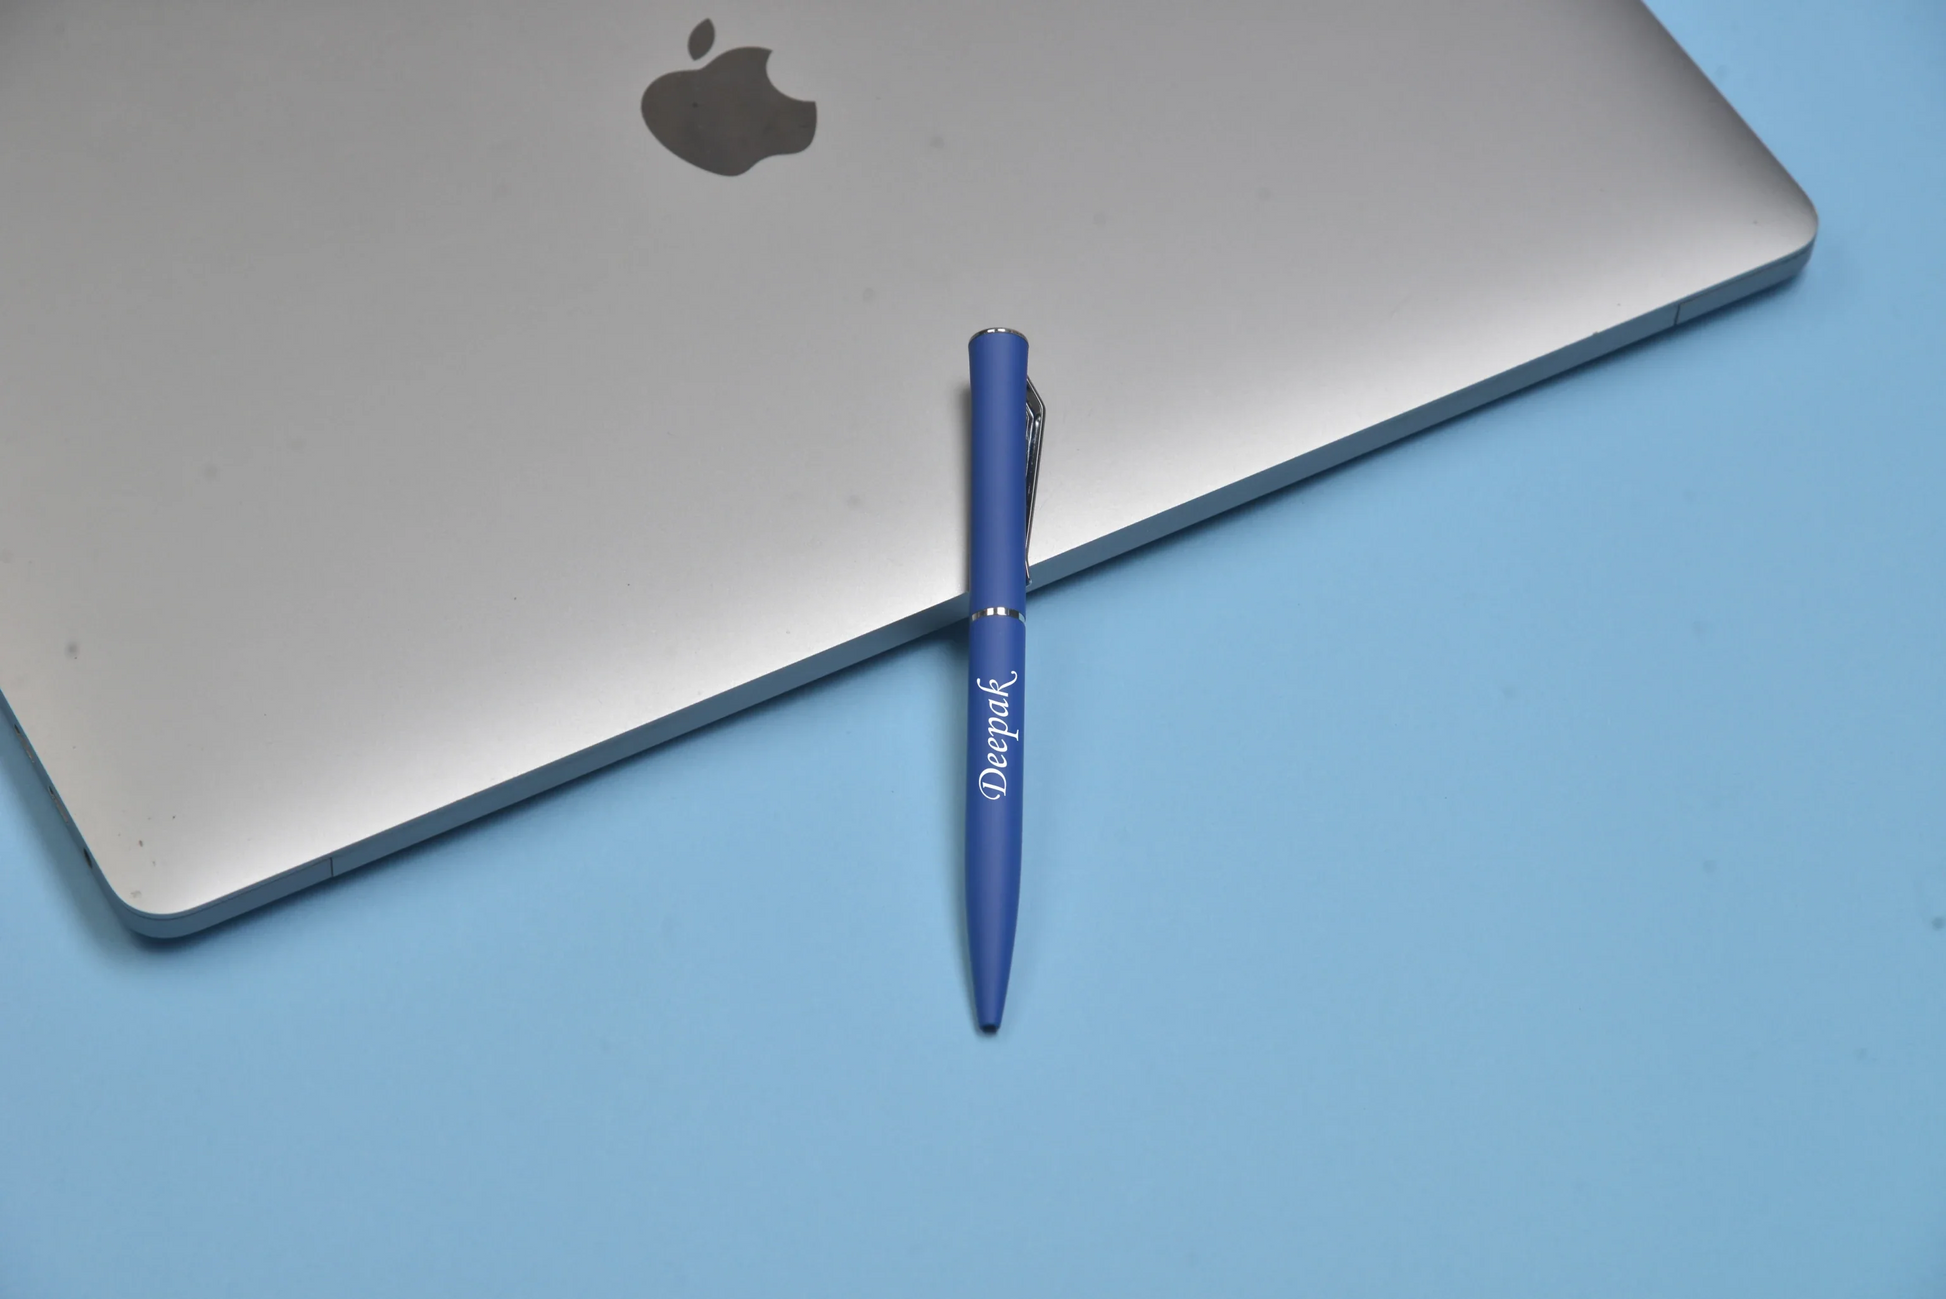 Elevate your writing game with our sleek metallic pen, perfect for any professional setting.